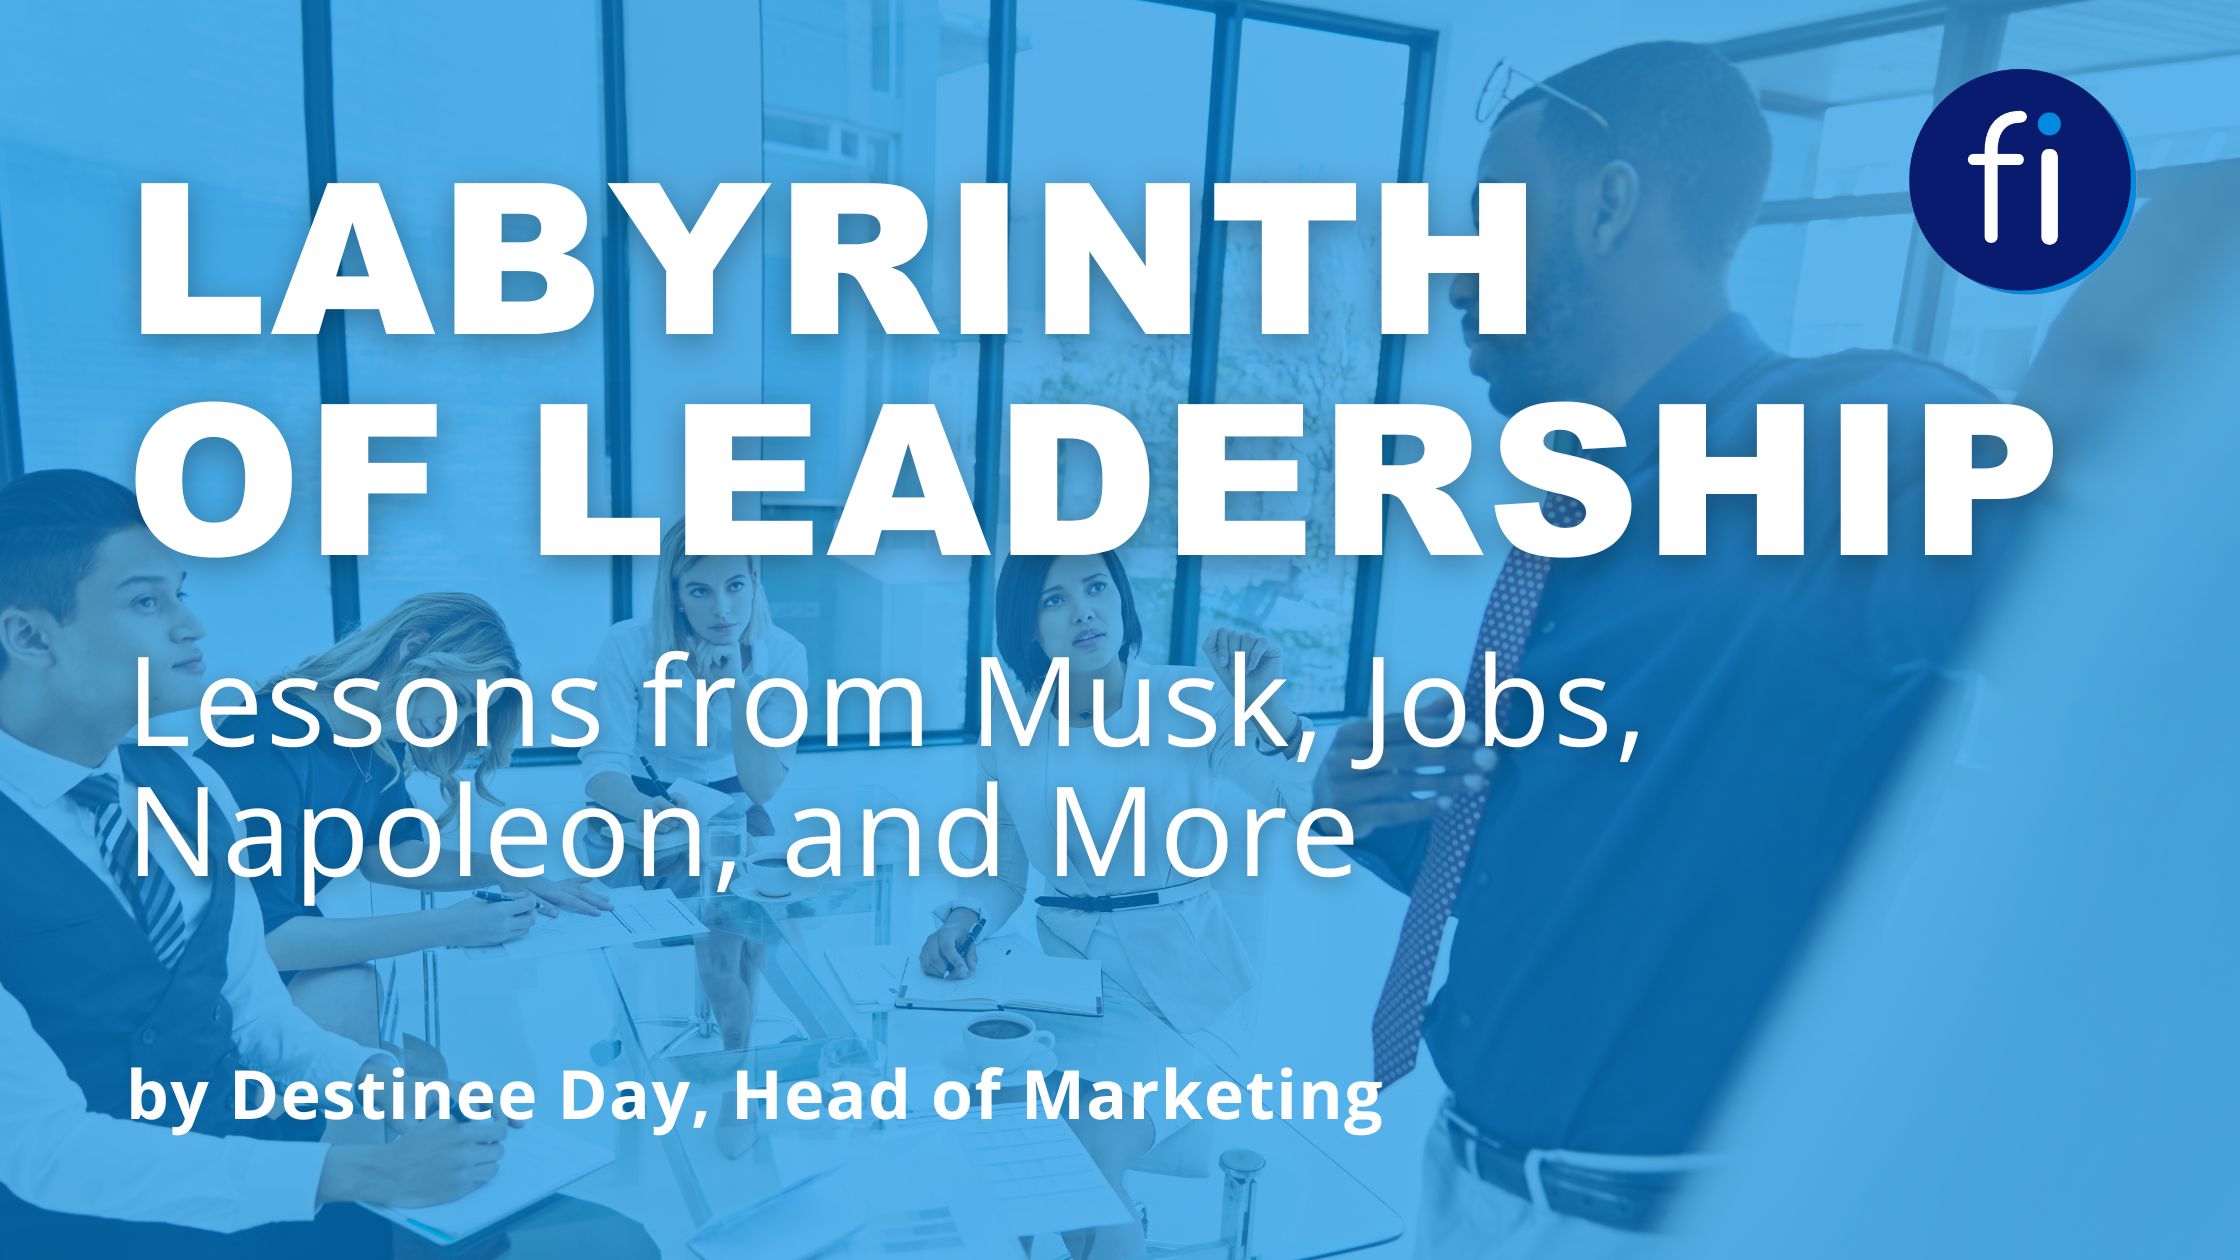 The Labyrinth of Leadership: Lessons from Musk, Jobs, Napoleon, and More